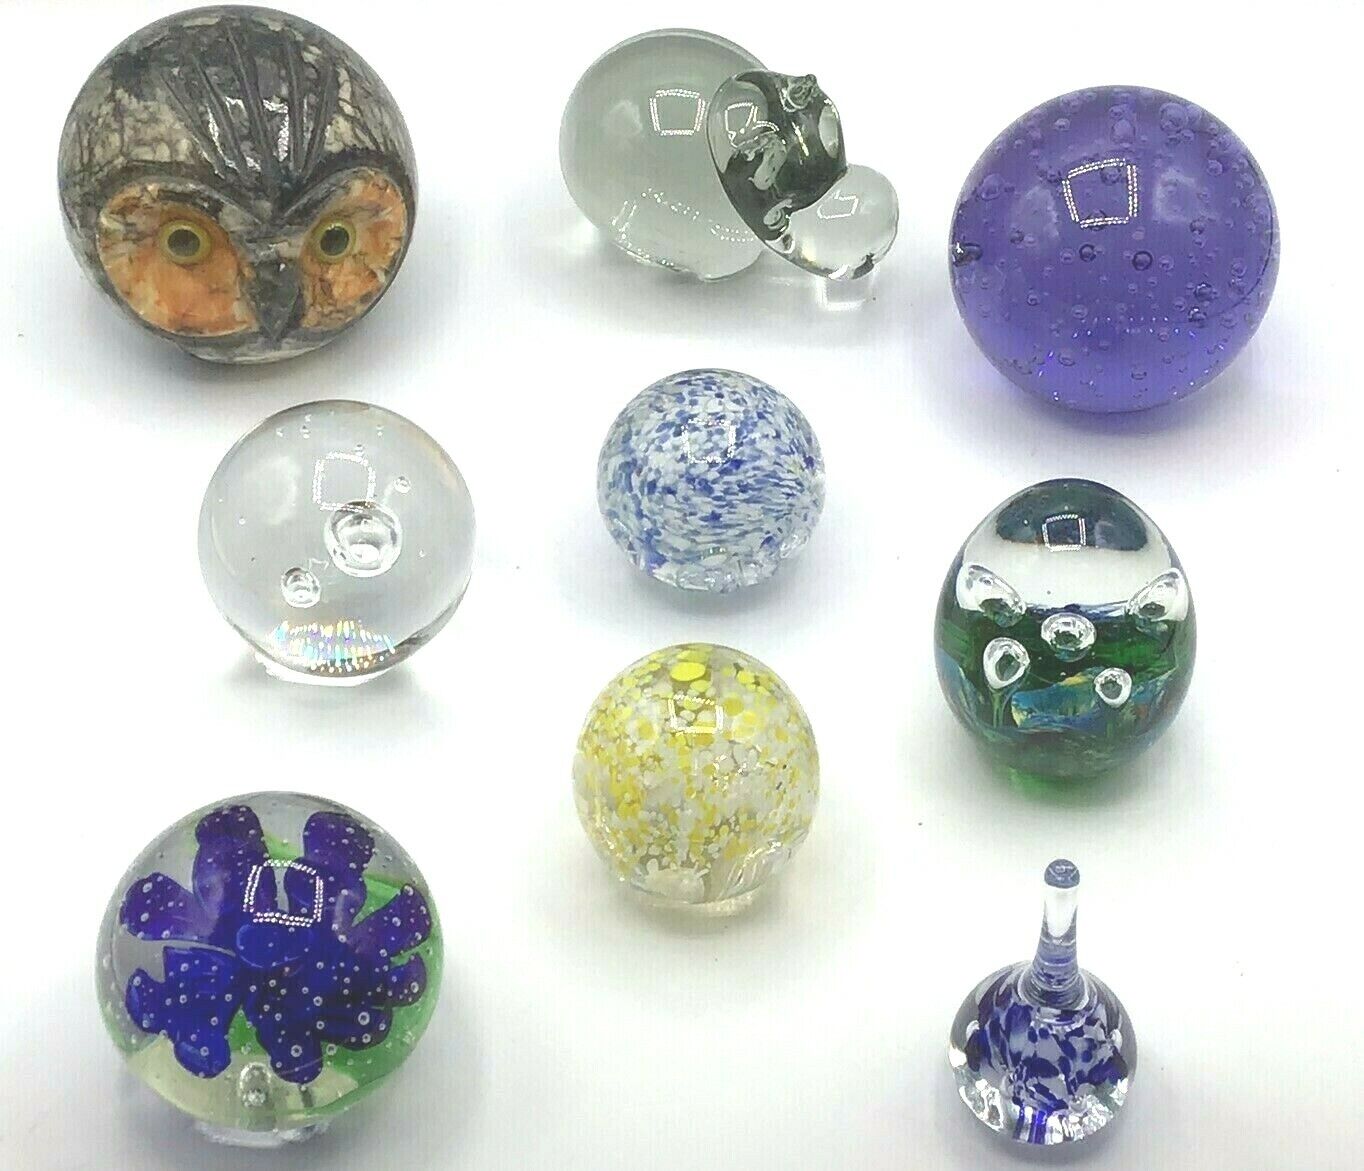 Lot of 9 Orb Ball Globe Teardrop paperweights - Gorgeous, Gibson, Owl, Hippo,  Без бренда